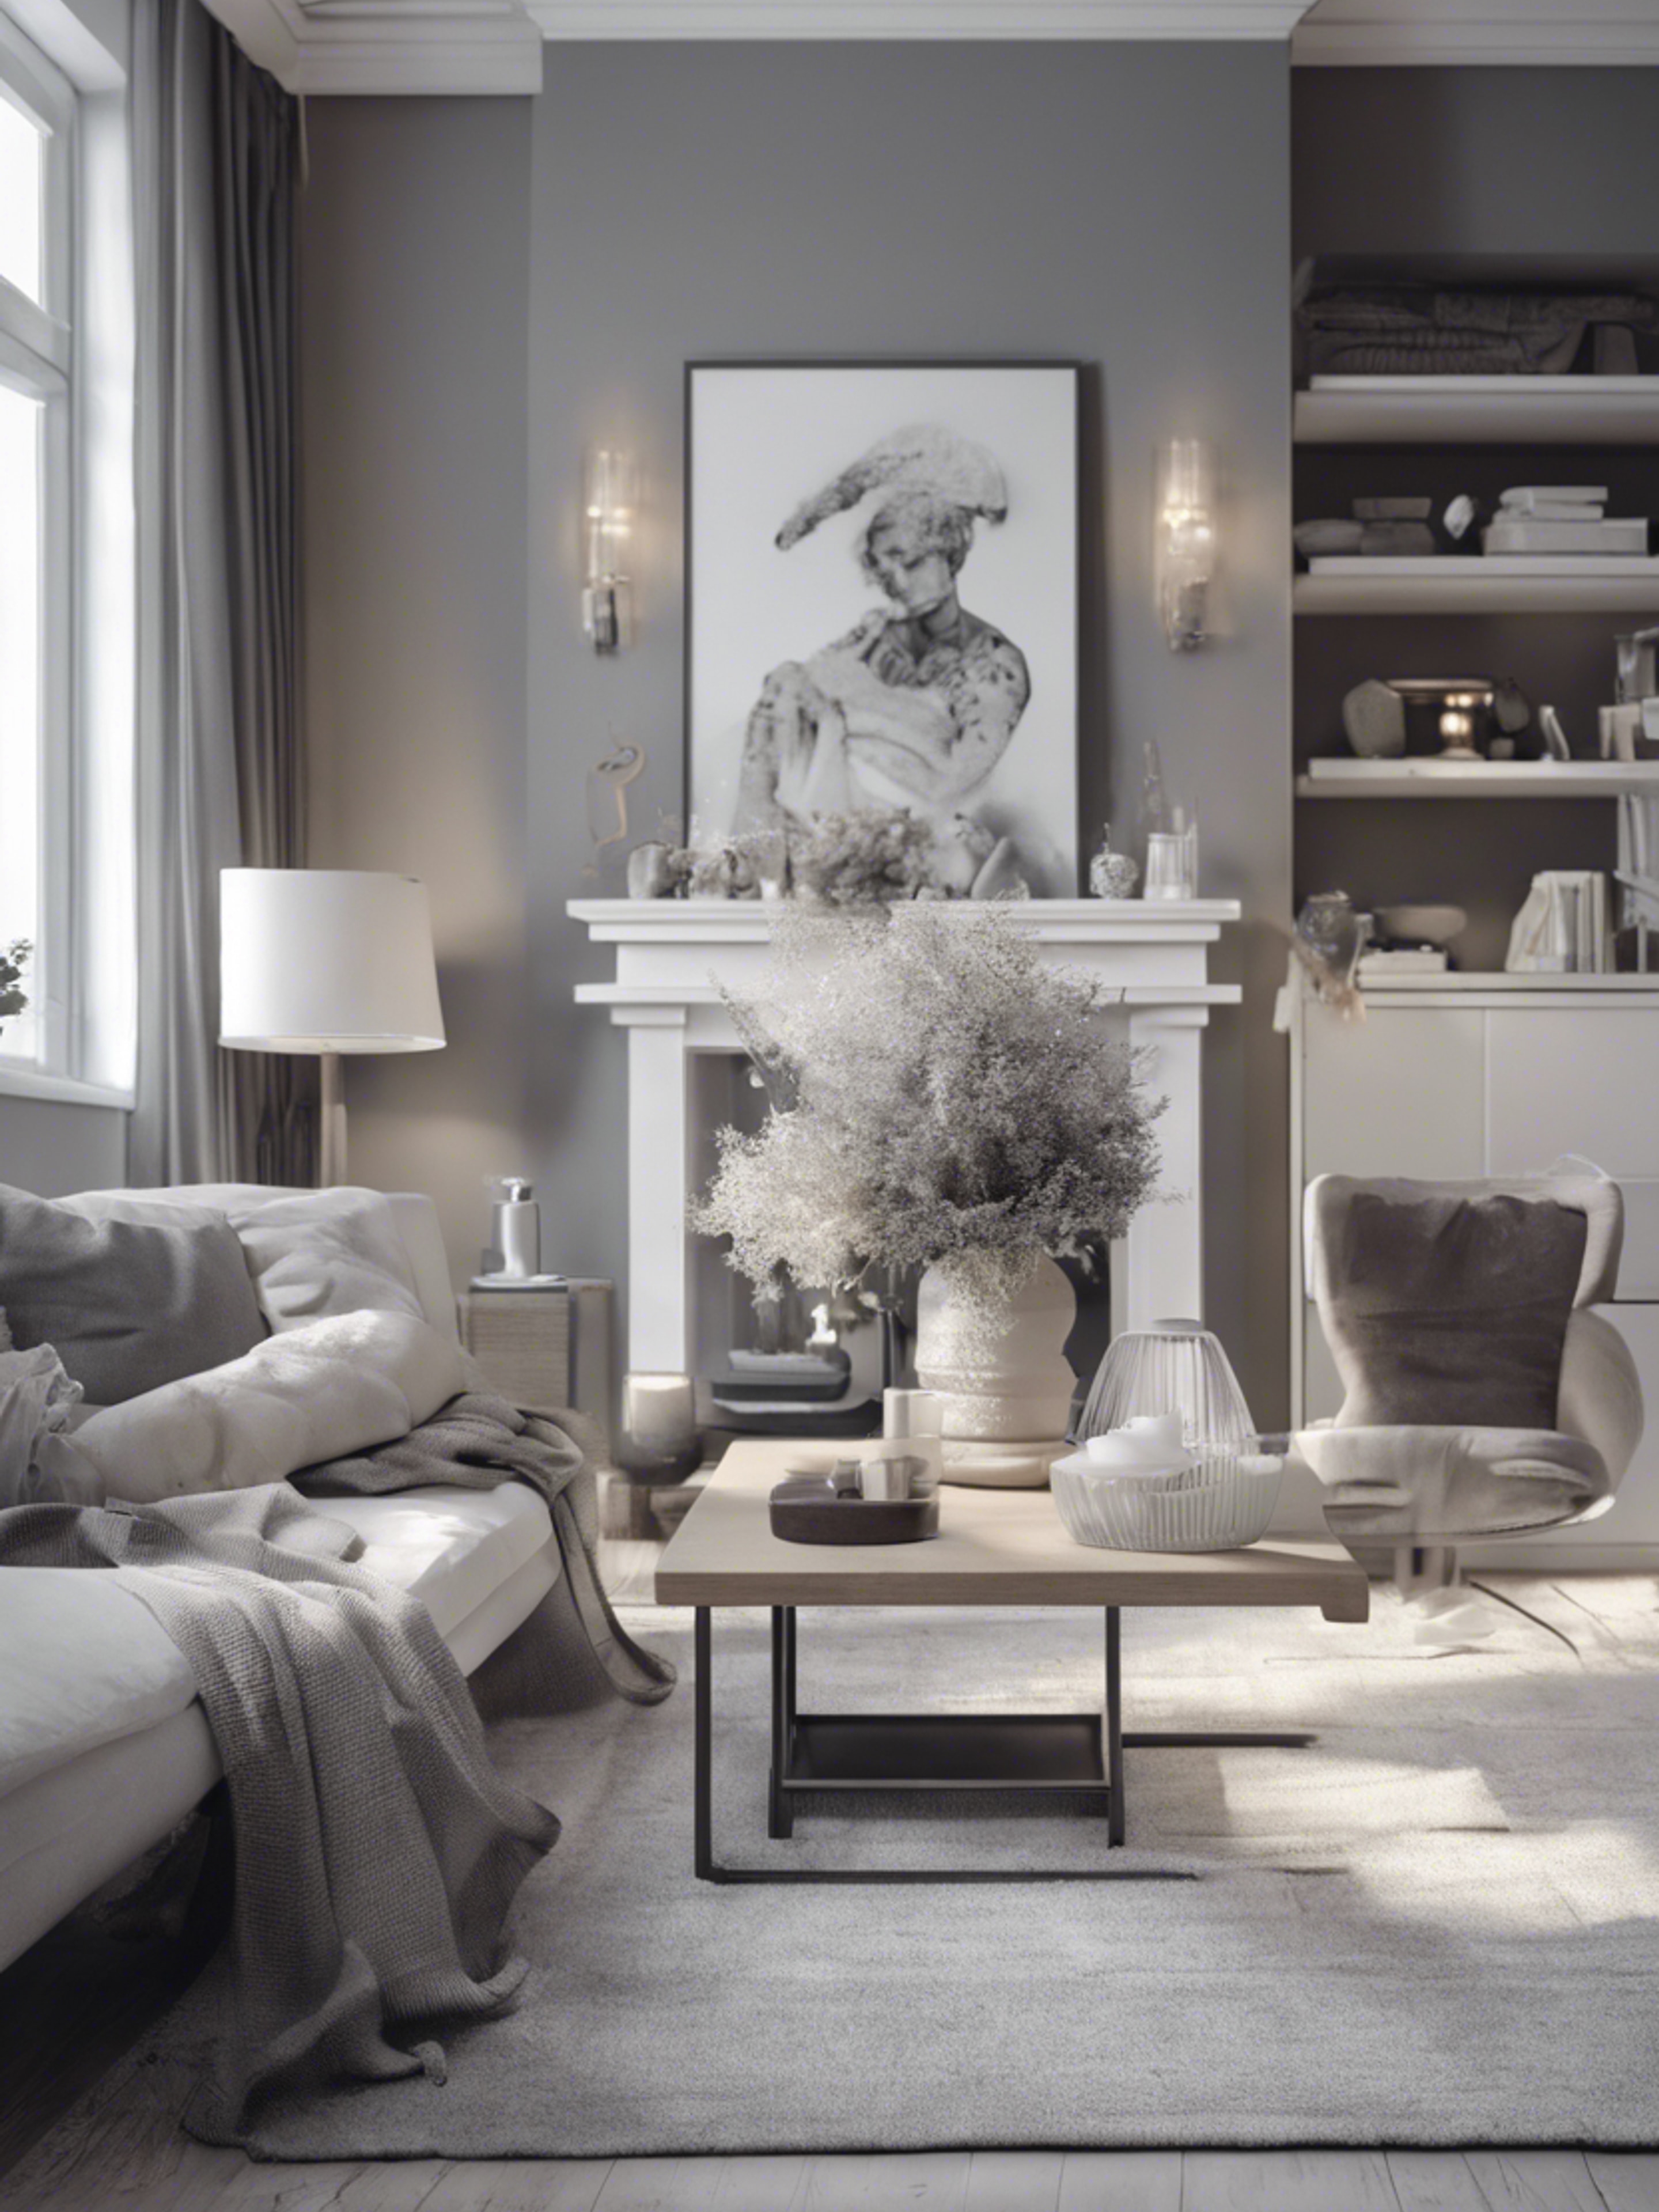 A classic interior design of a living room in neutral gray and white tones. 벽지[b4f6eac2faba4219b360]